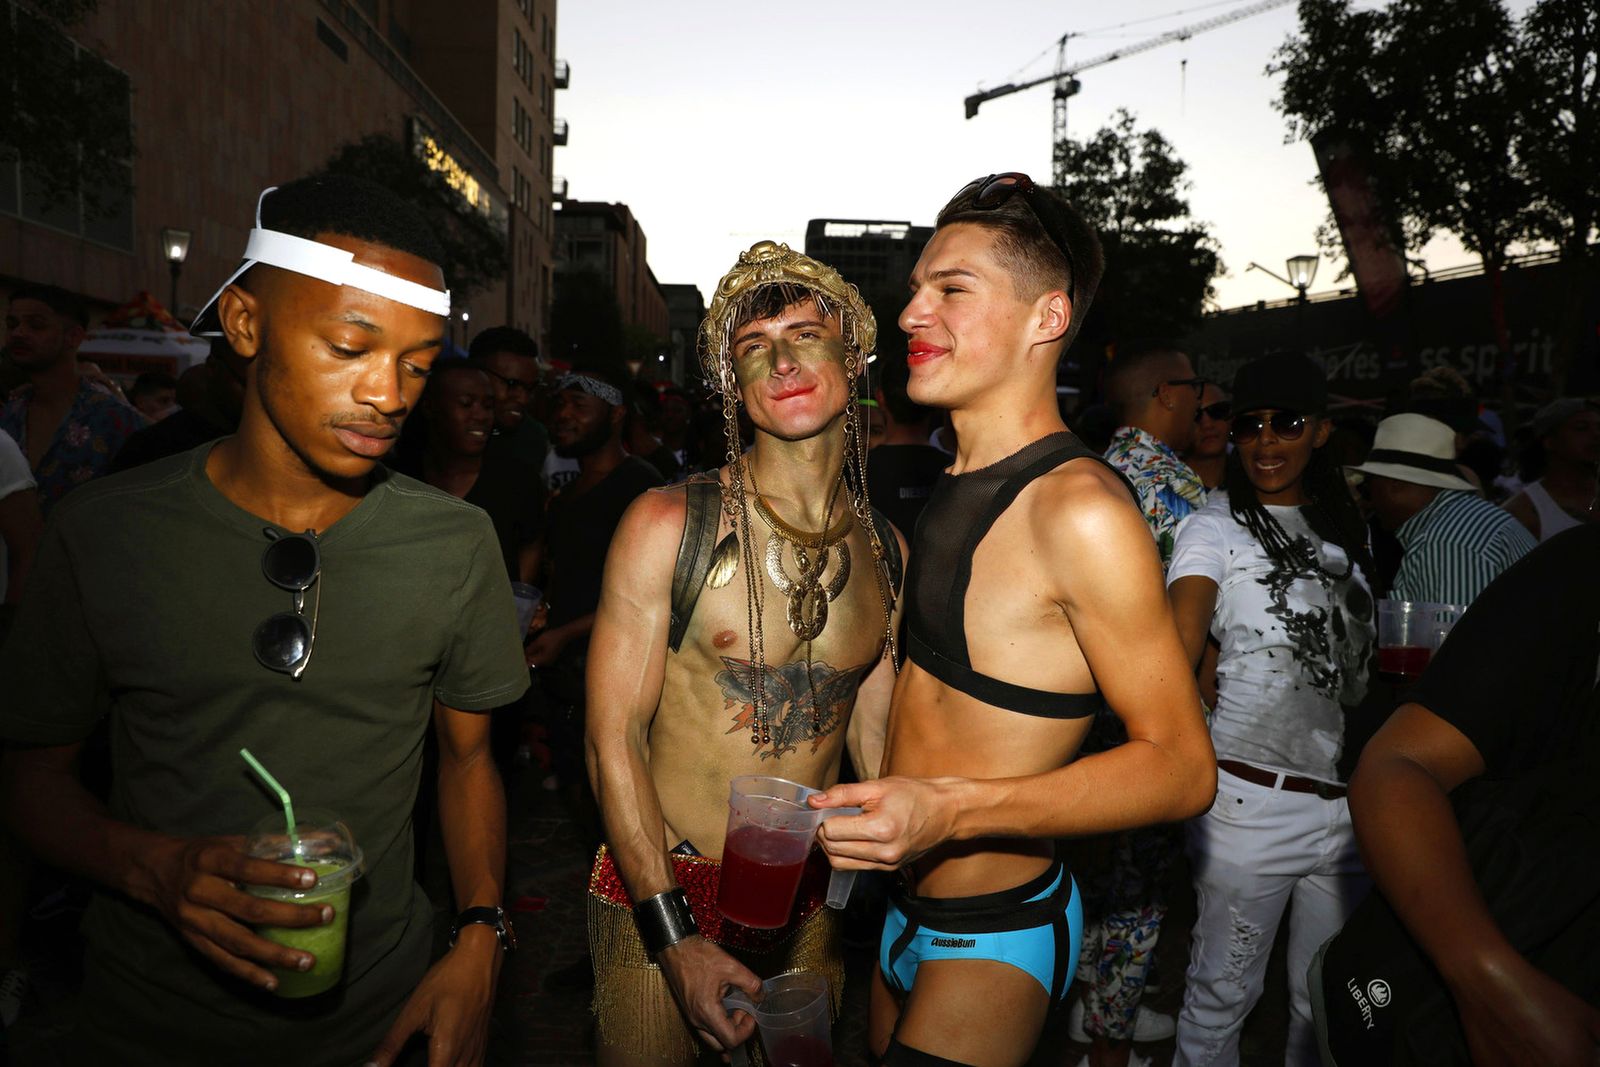 © Ilvy Njiokiktjien - Kevin du Plessis (middle) during the Gay Pride in Johannesburg, South Africa.